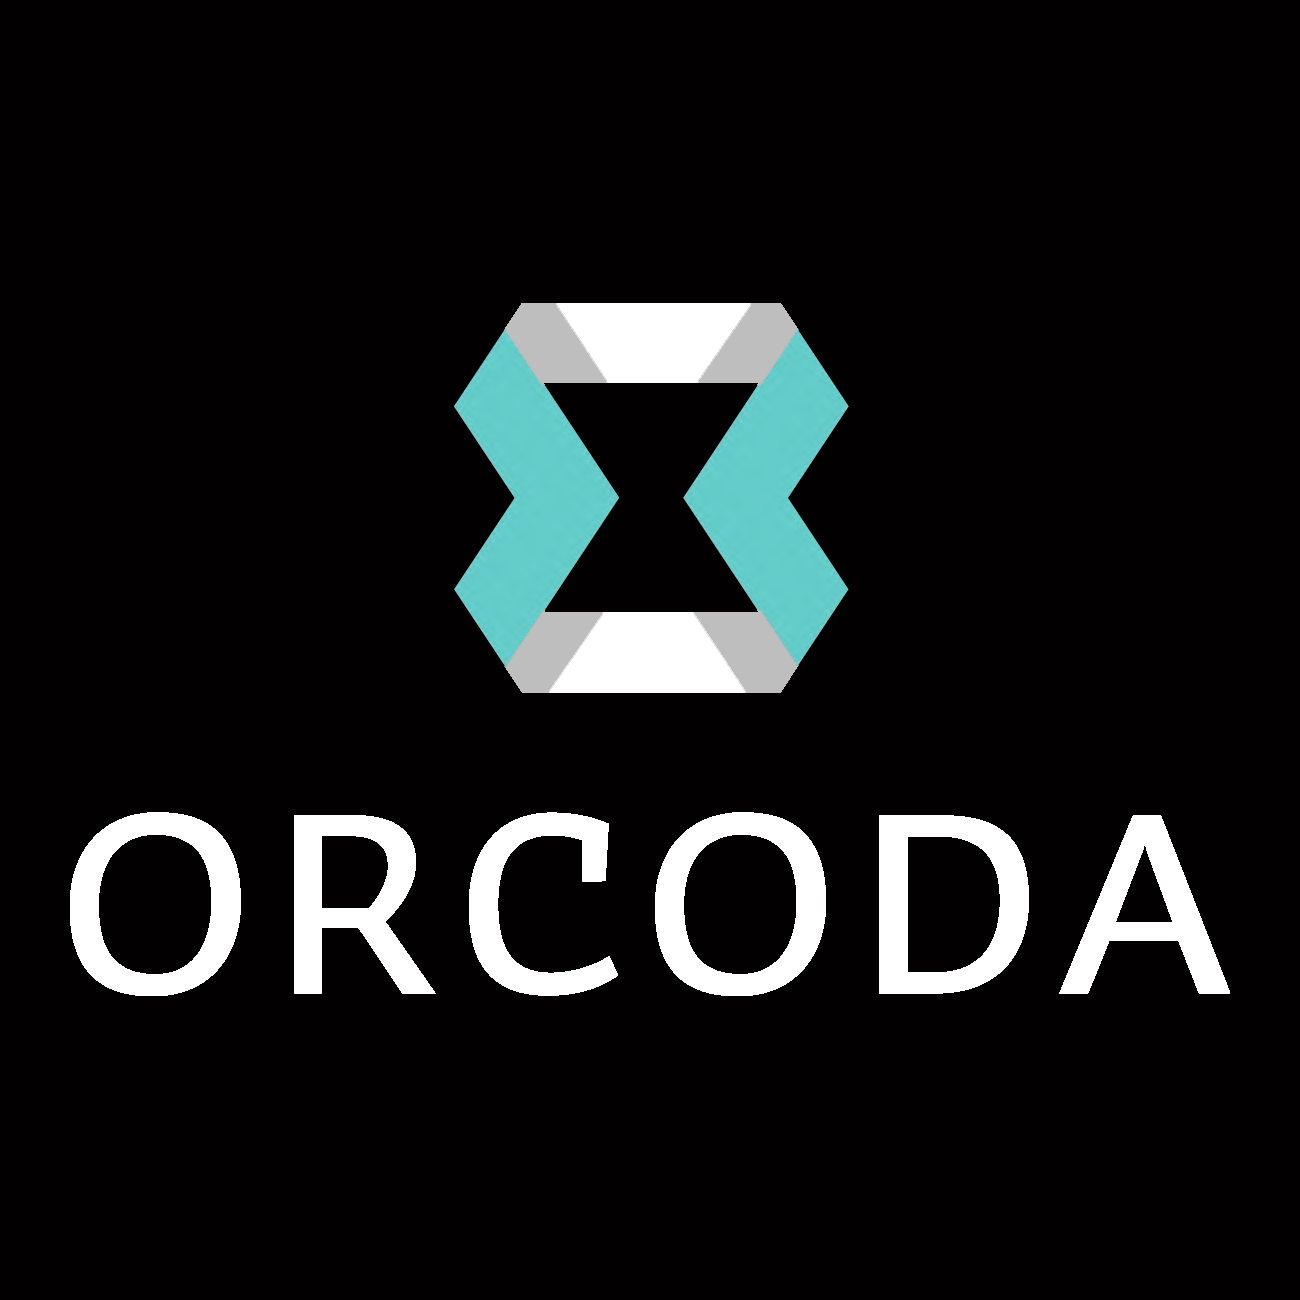 ORCODA_Stacked_Logo_Blk_Square